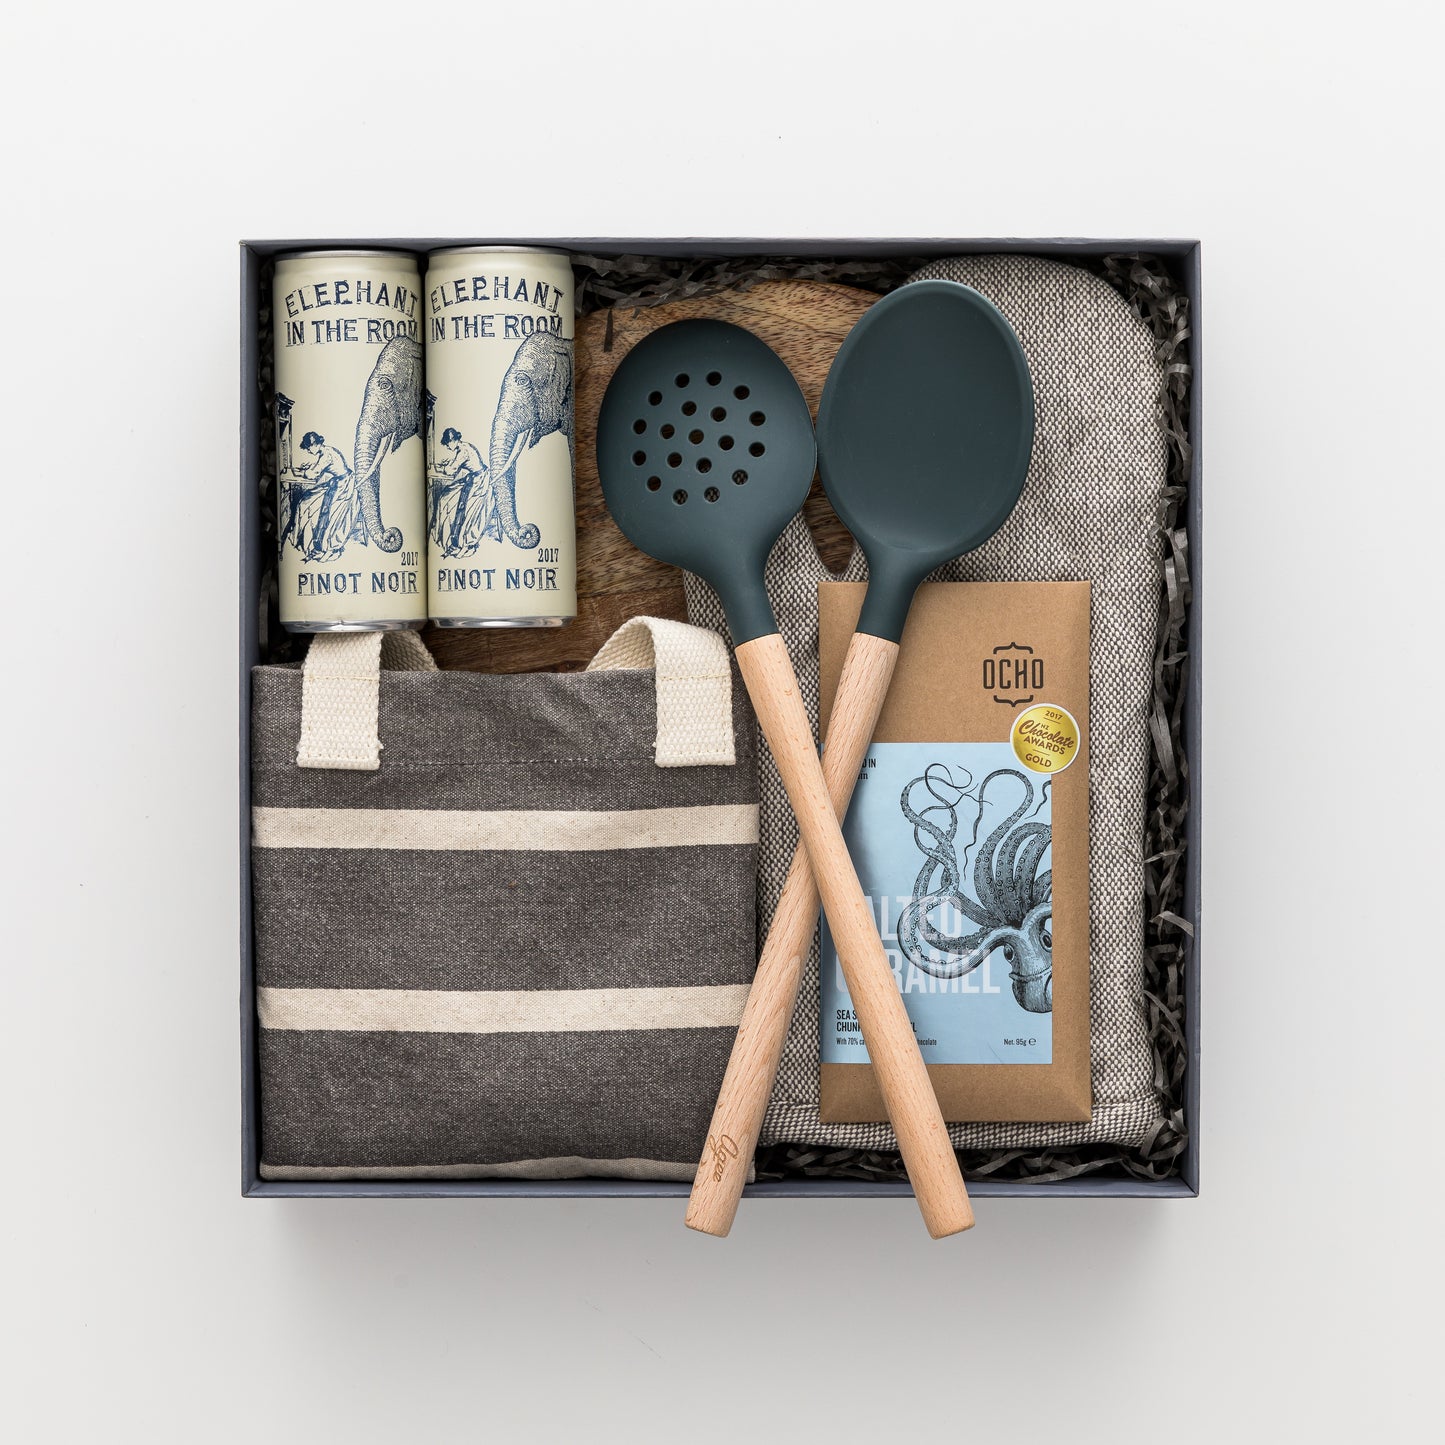 Gift box includes wooden board, two red wine cans, slotted spoon, spoon, tote bag, oven mitt, chocolate.